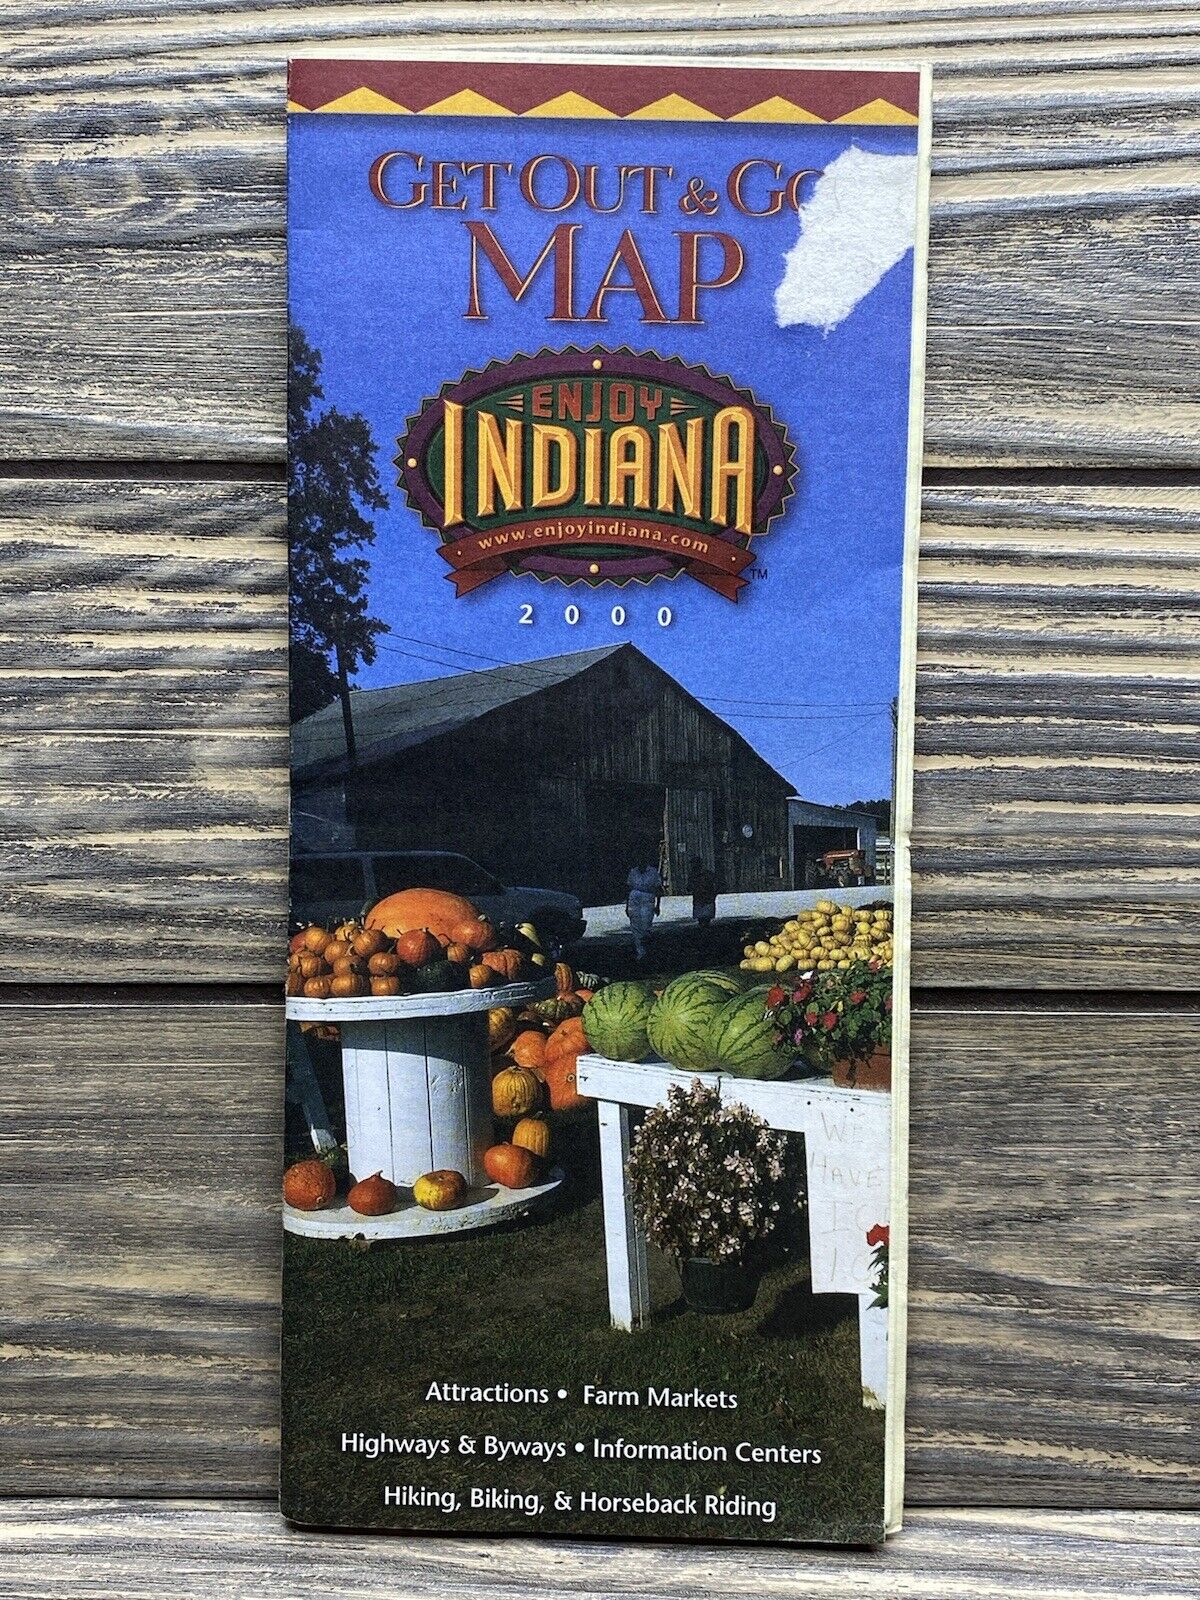 Vintage 2000 Get Out And Go Indiana￼ Map Attractions and Highways